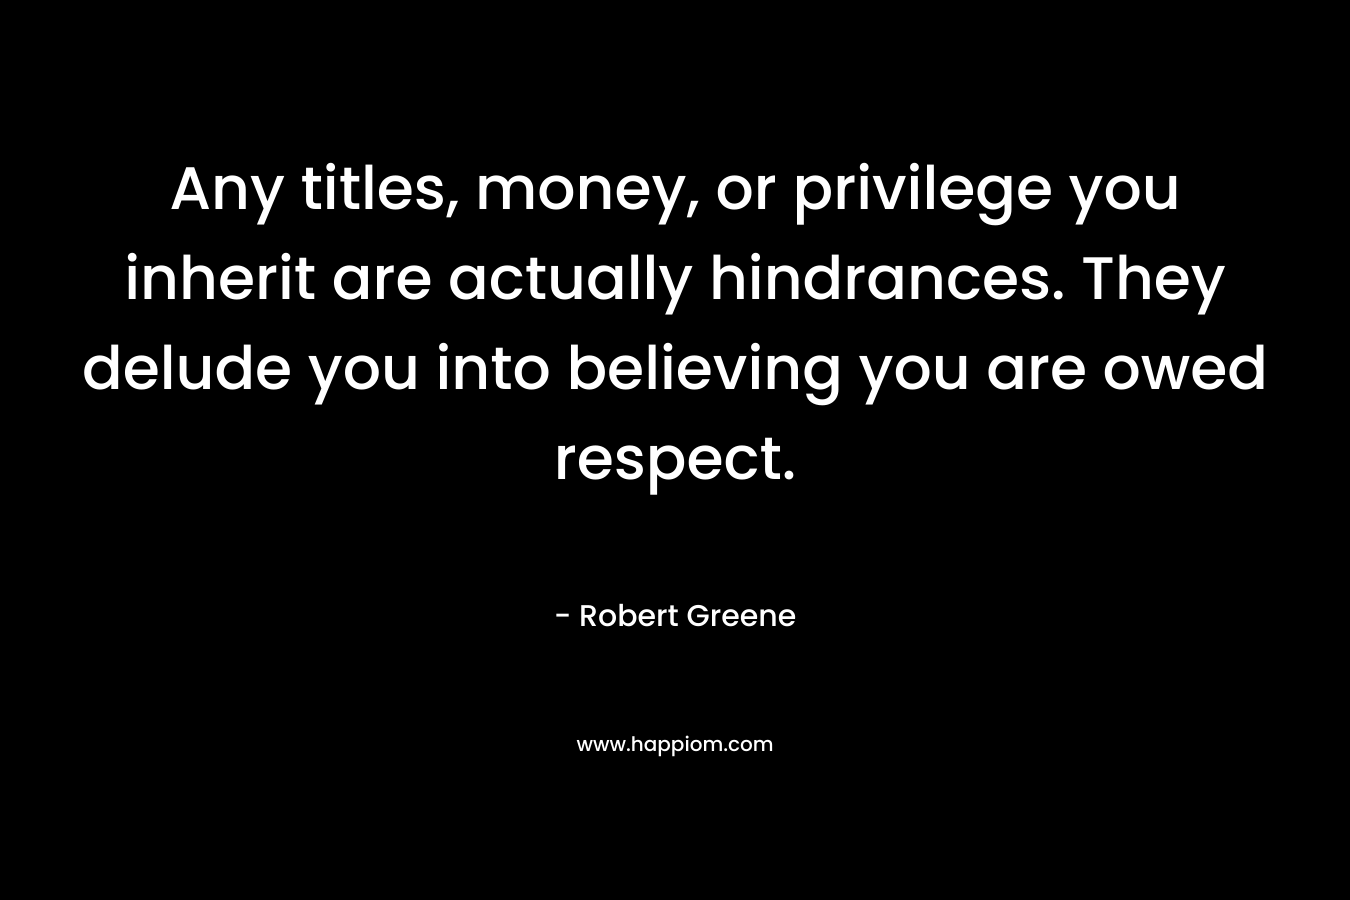 Any titles, money, or privilege you inherit are actually hindrances. They delude you into believing you are owed respect.